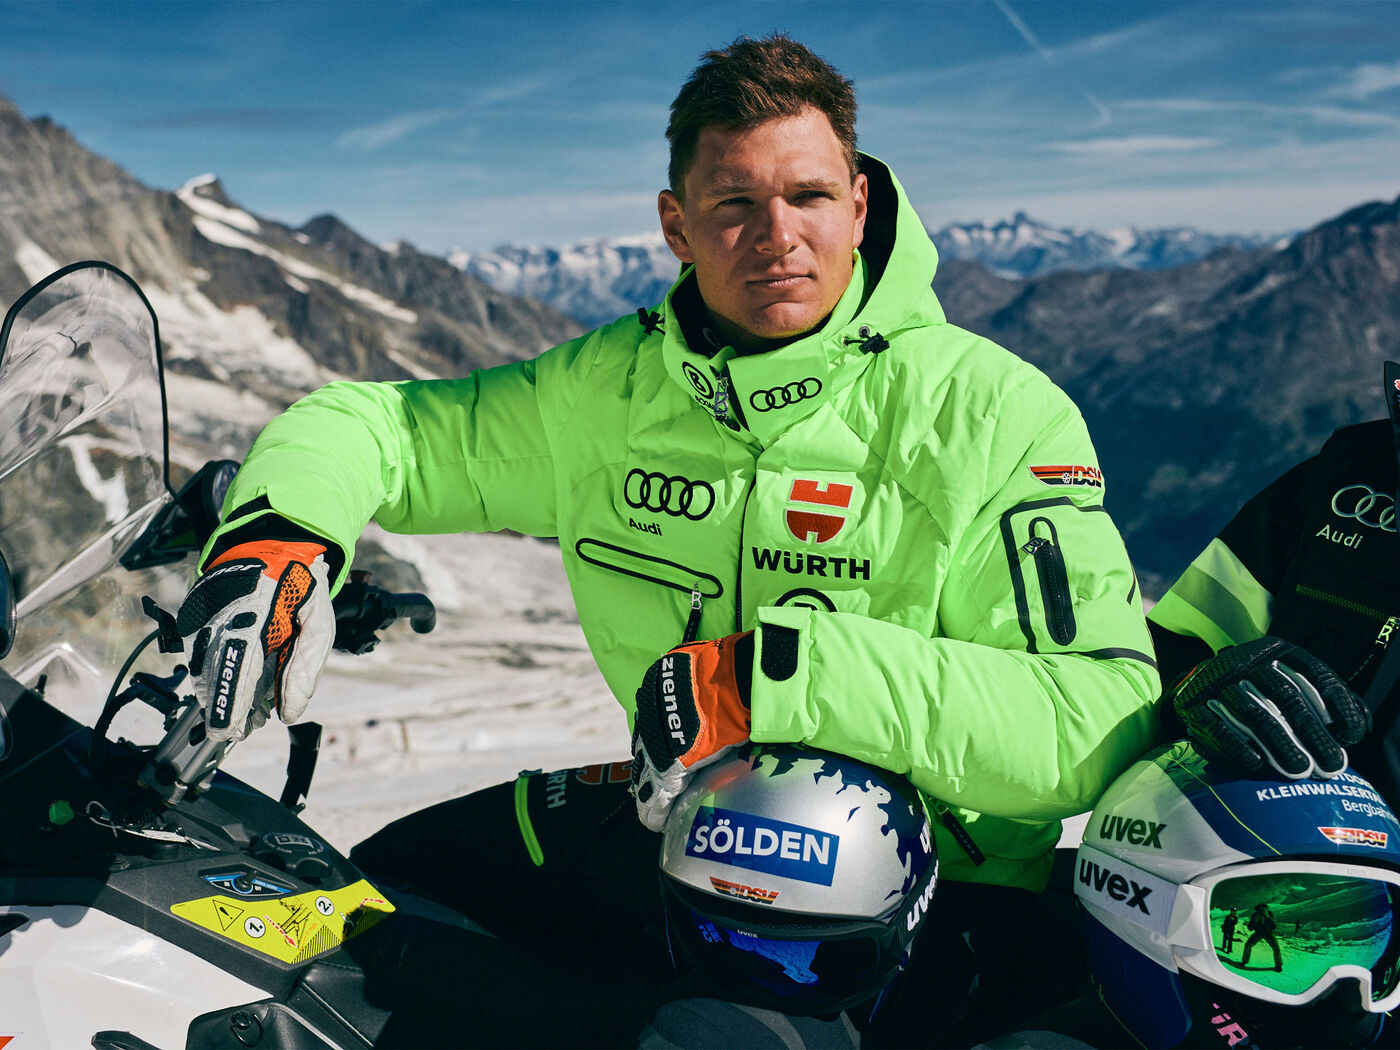 Ski Almost for a Association | Years Perfect and – Team BOGNER 70 the News German